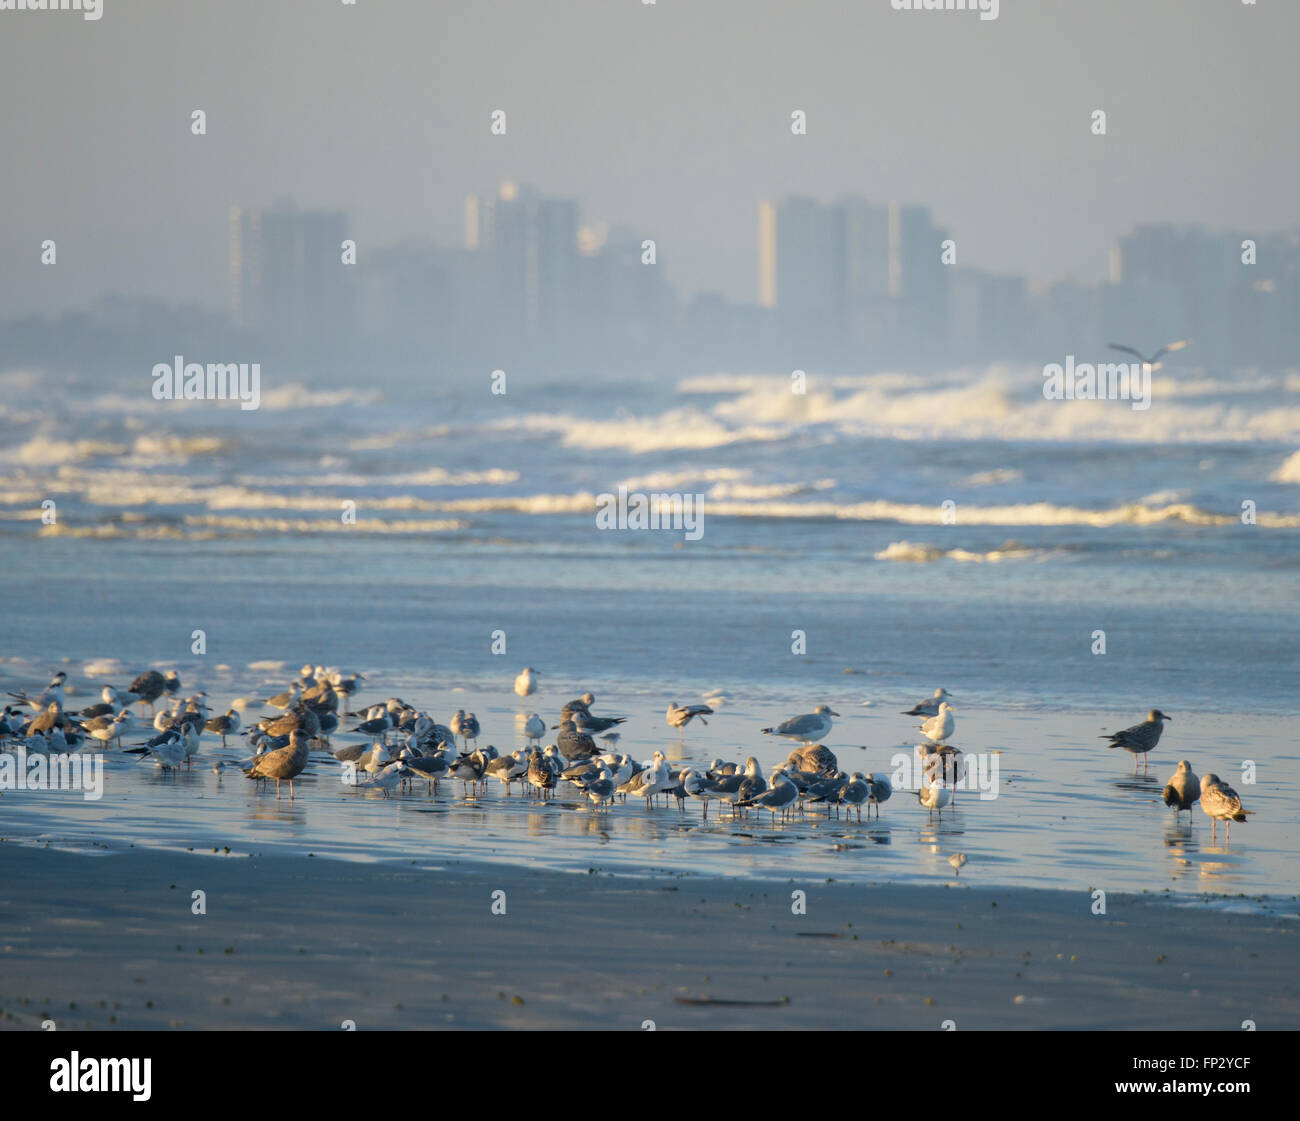 Wintering shore birds on beach at Lighthouse Point Park, Ponce Inlet, Volusia County Florida USA. Daytona beach in distance Stock Photo